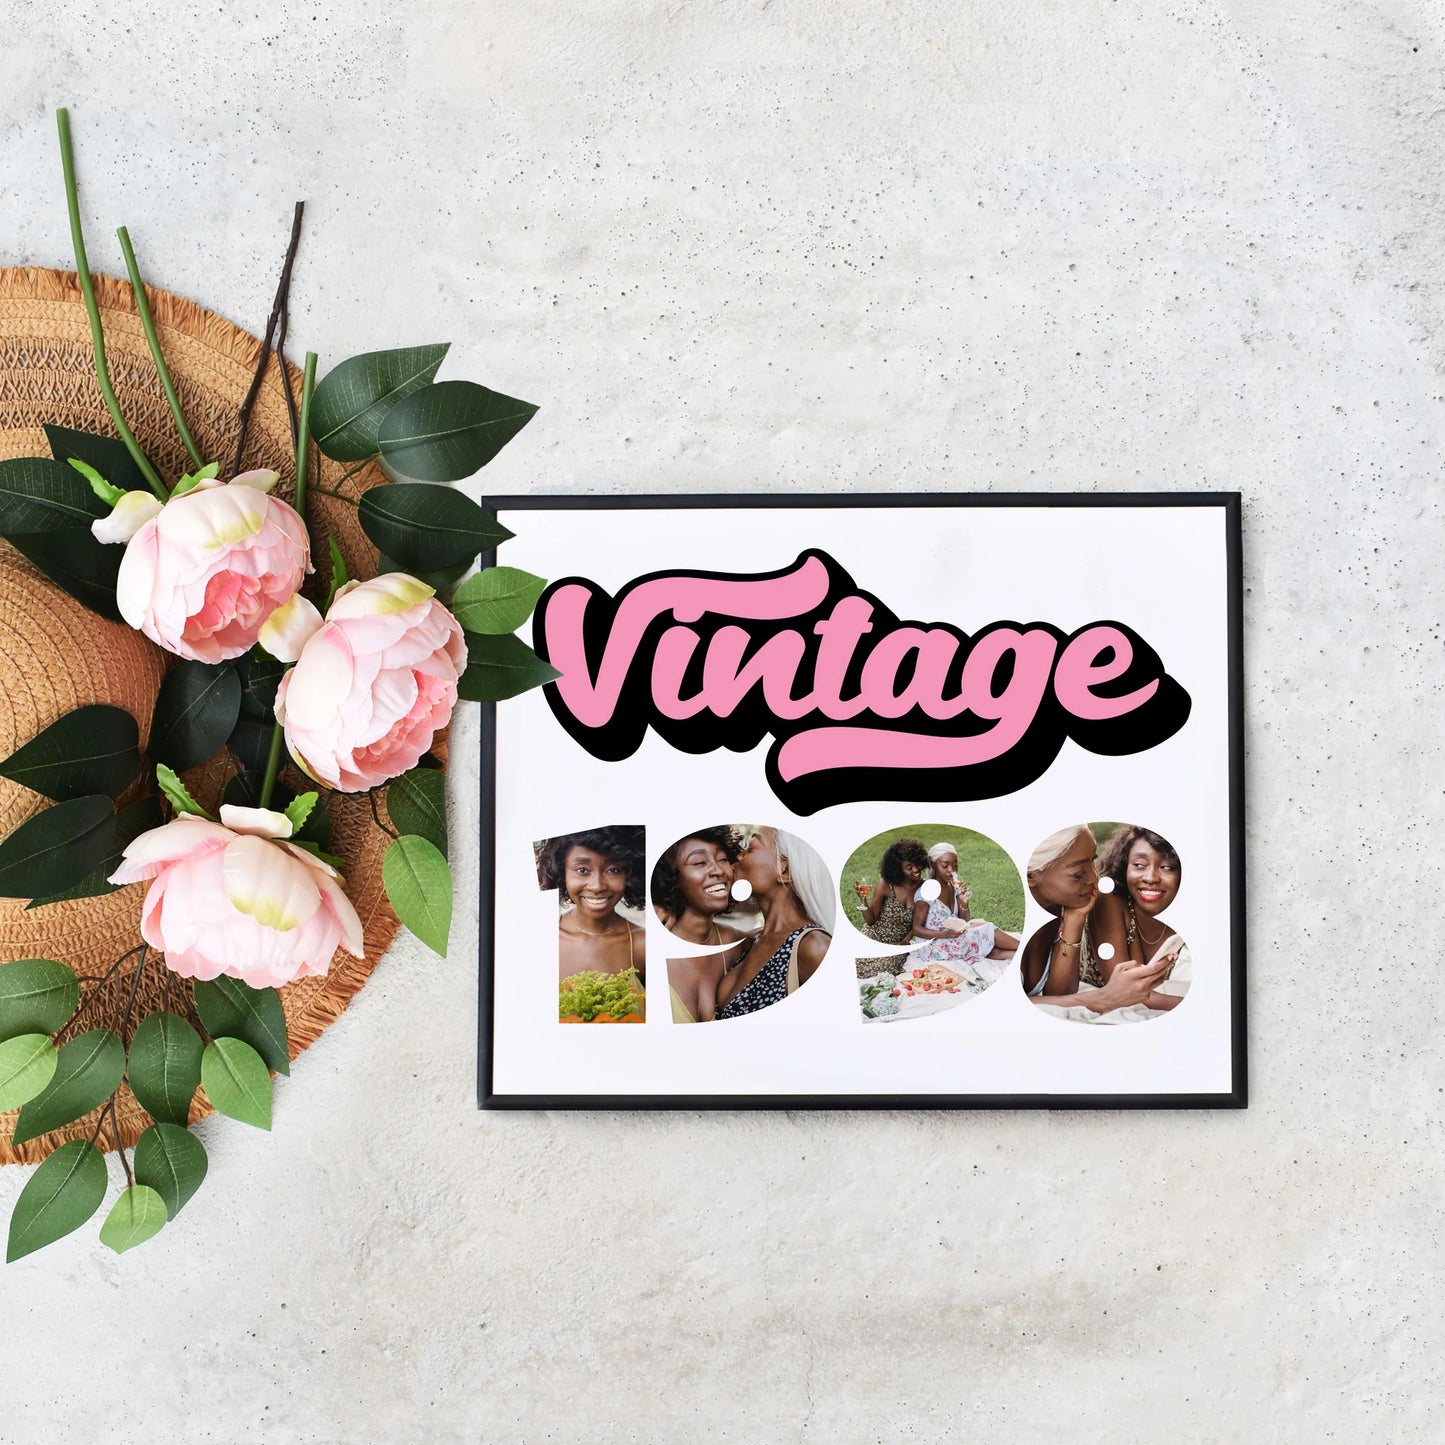 Easy DIY Vintage 1998 Editable Collage Last Minute Gift on a Budget